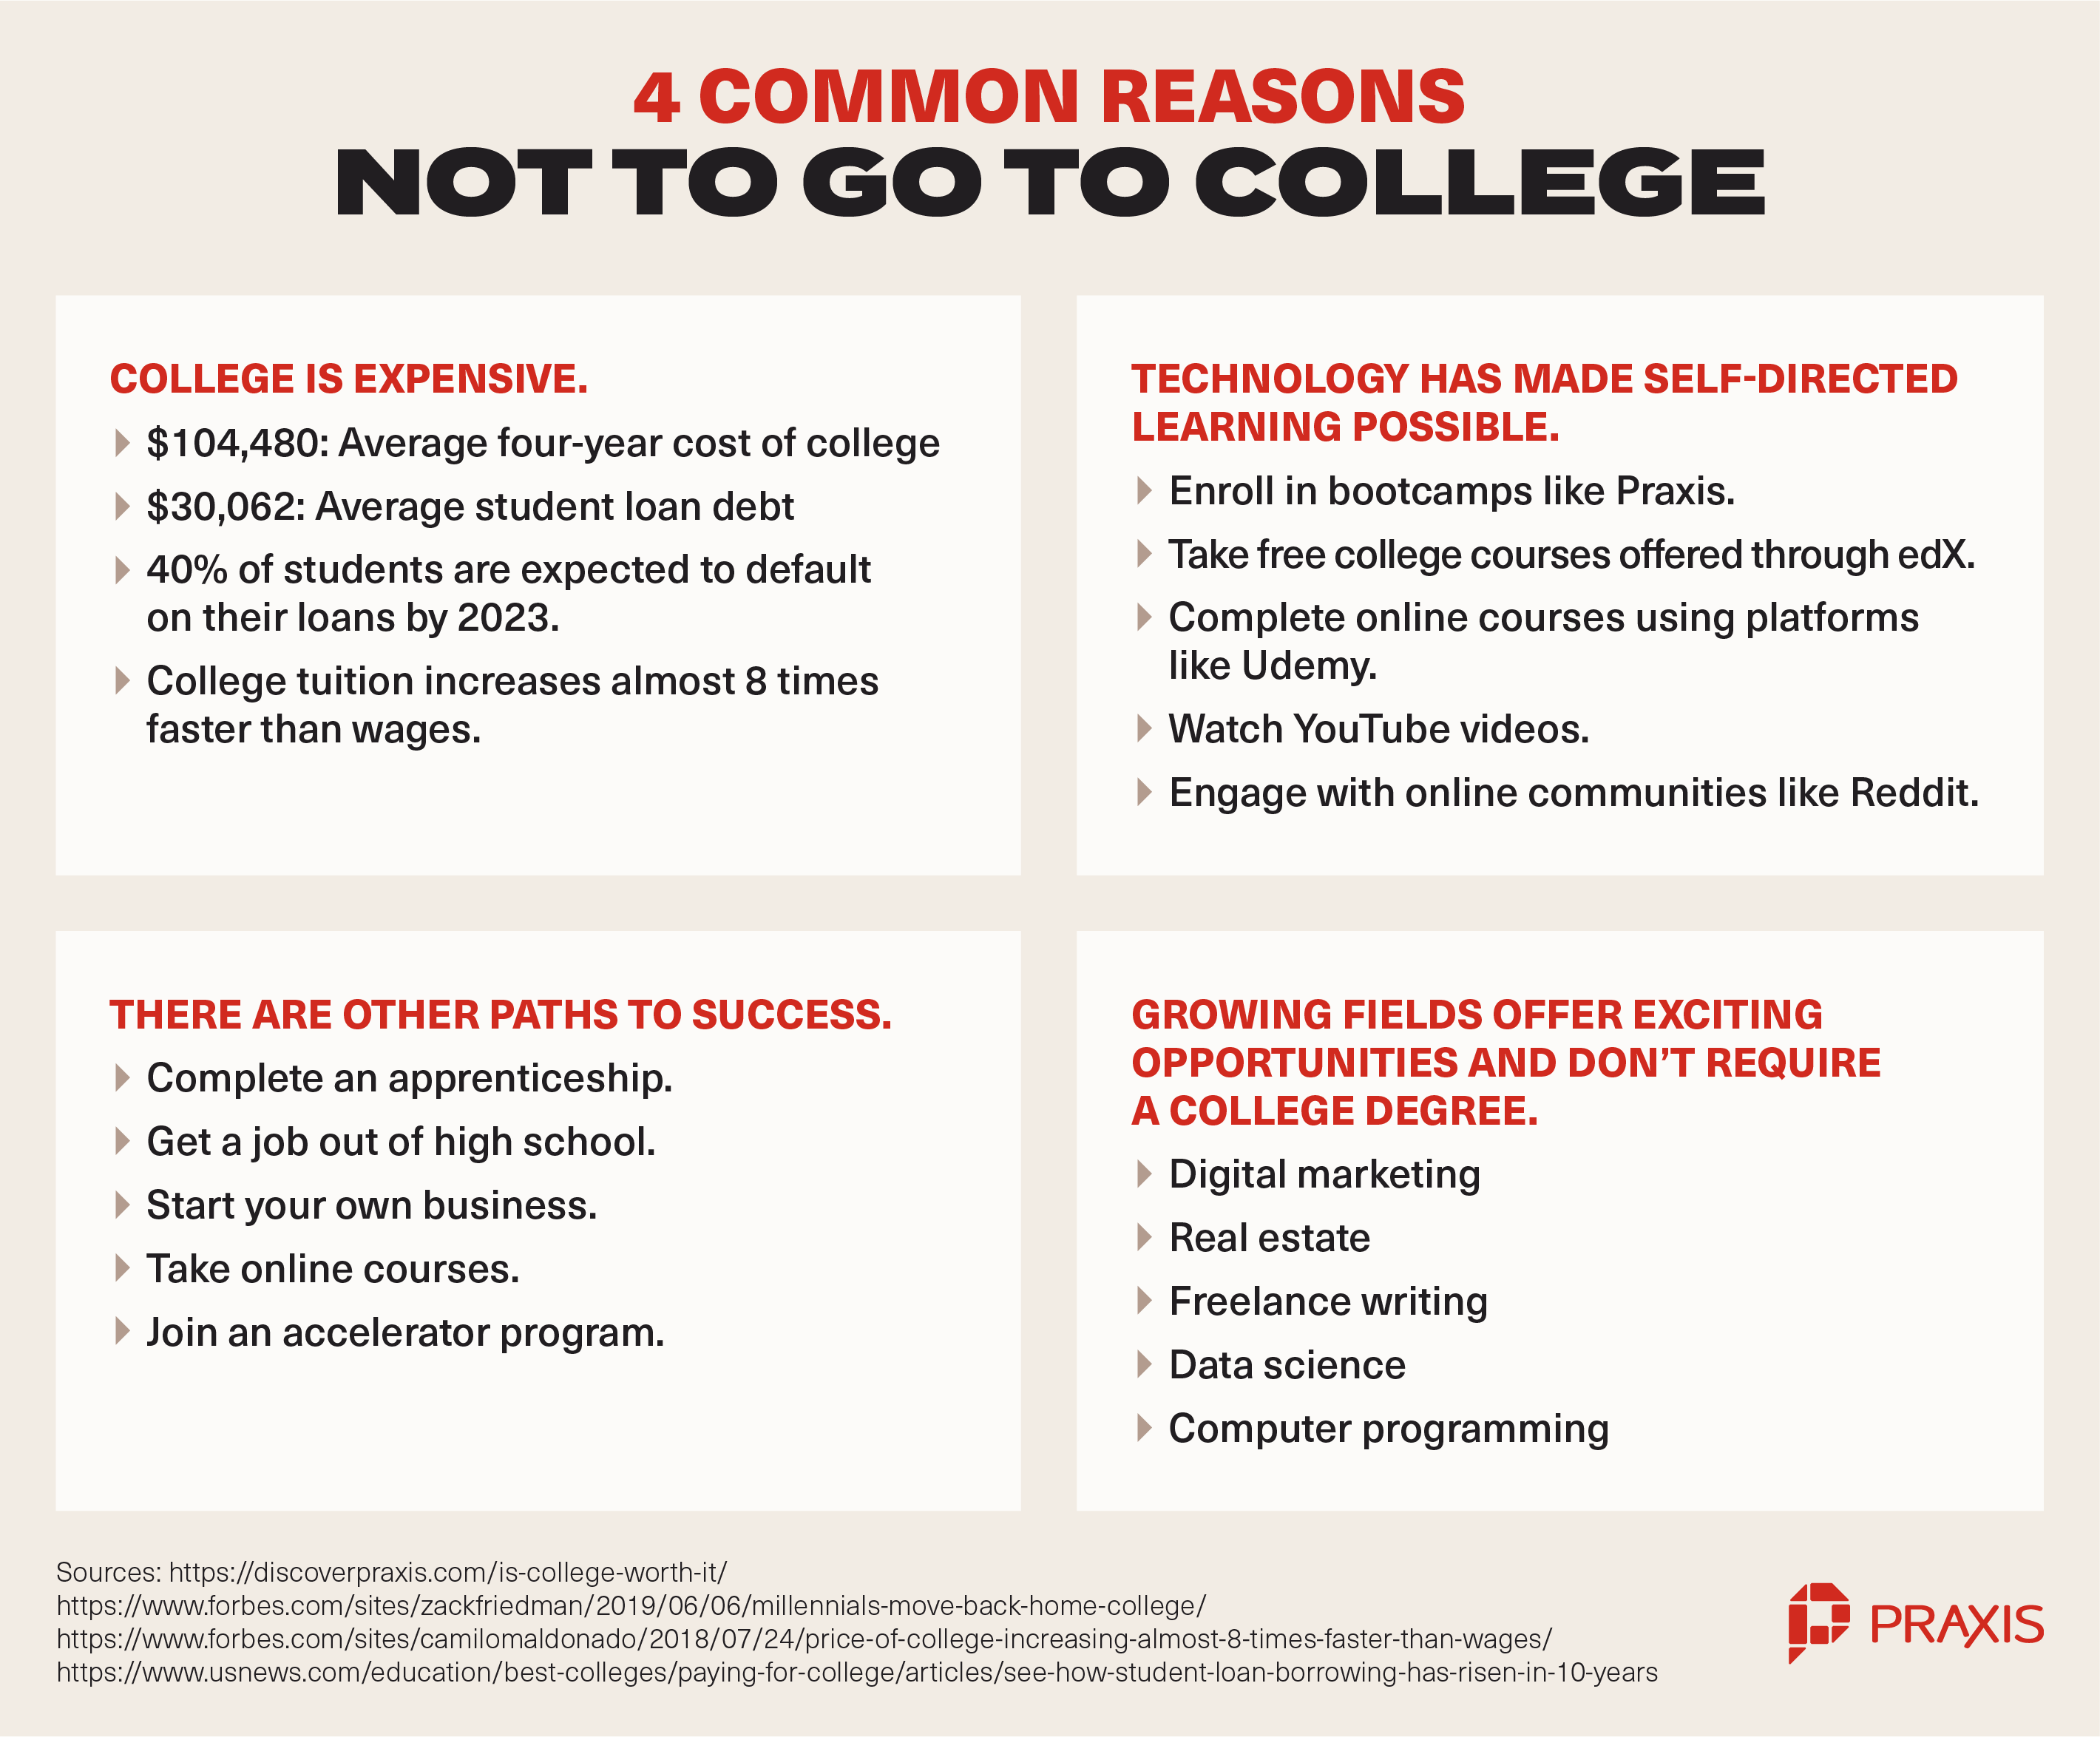 What Are Your Reasons for Not Going to College